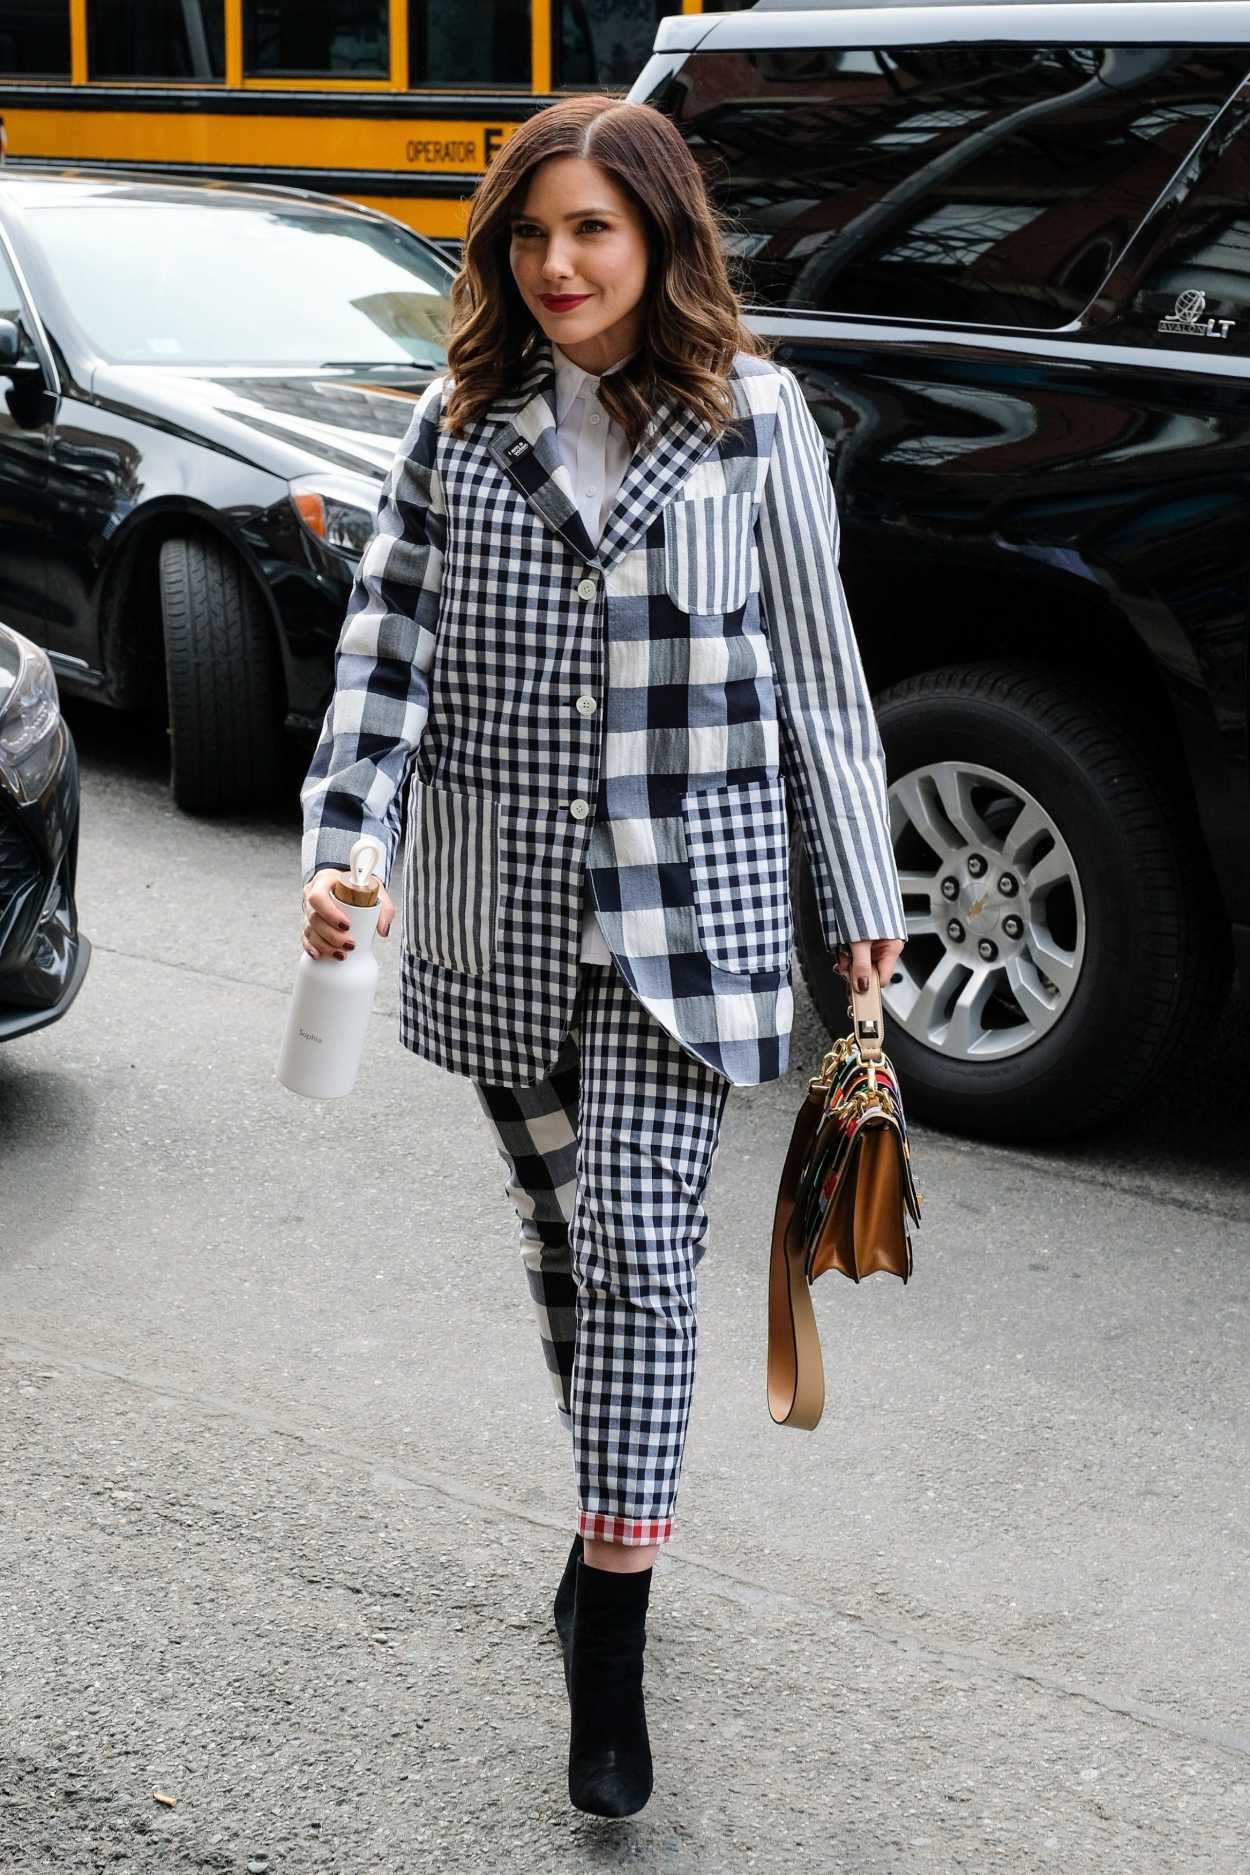 Sophia Bush in a Plaid Suit Was Seen Out in NYC 04/12/2019 – celebsla.com